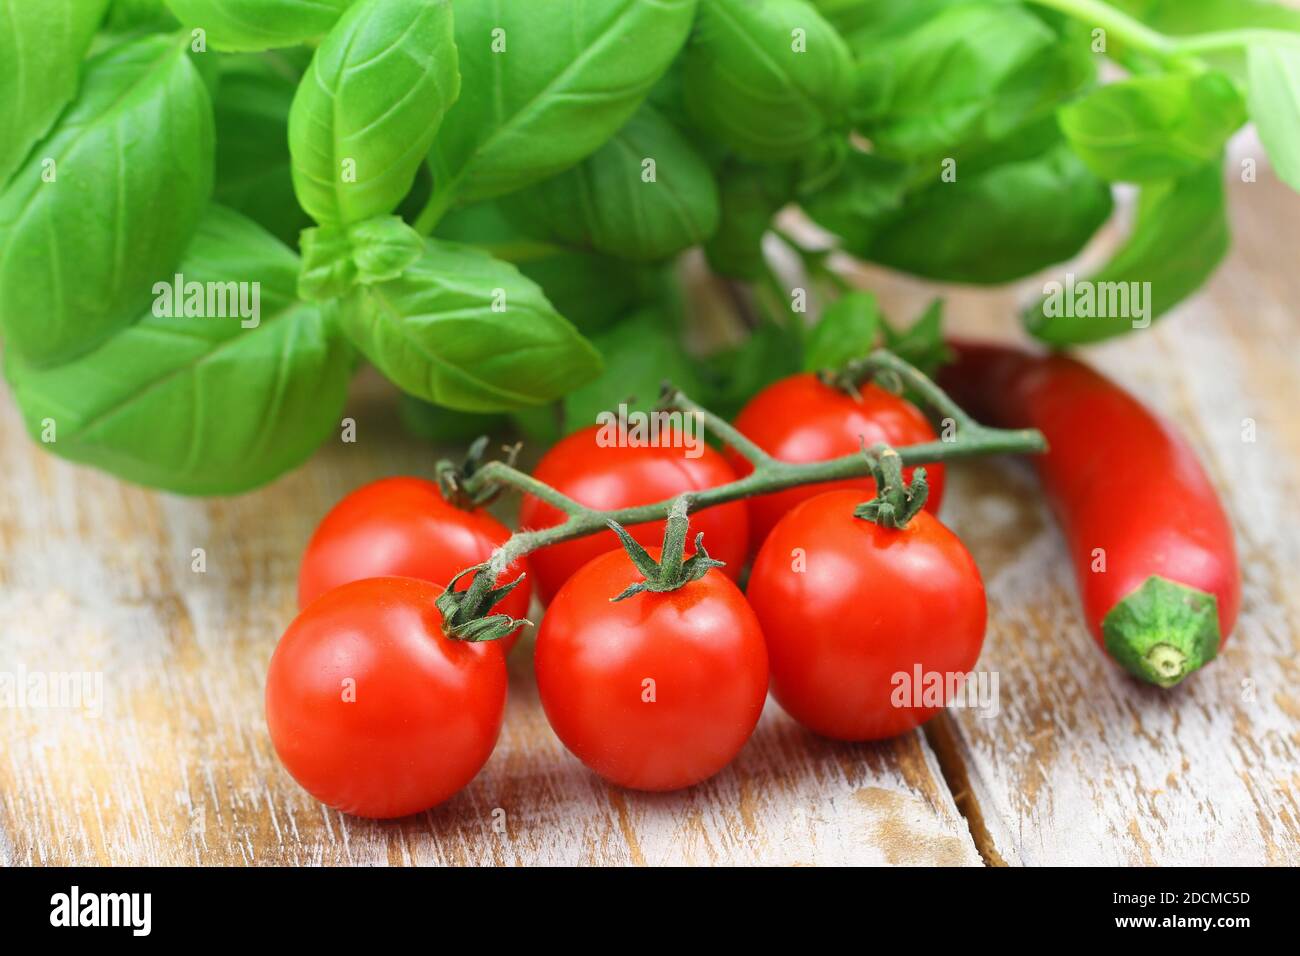 Ingredients for perfect pasta: ripe cherry tomatoes, fresh basil leaves and chilli on rustic wooden surface Stock Photo